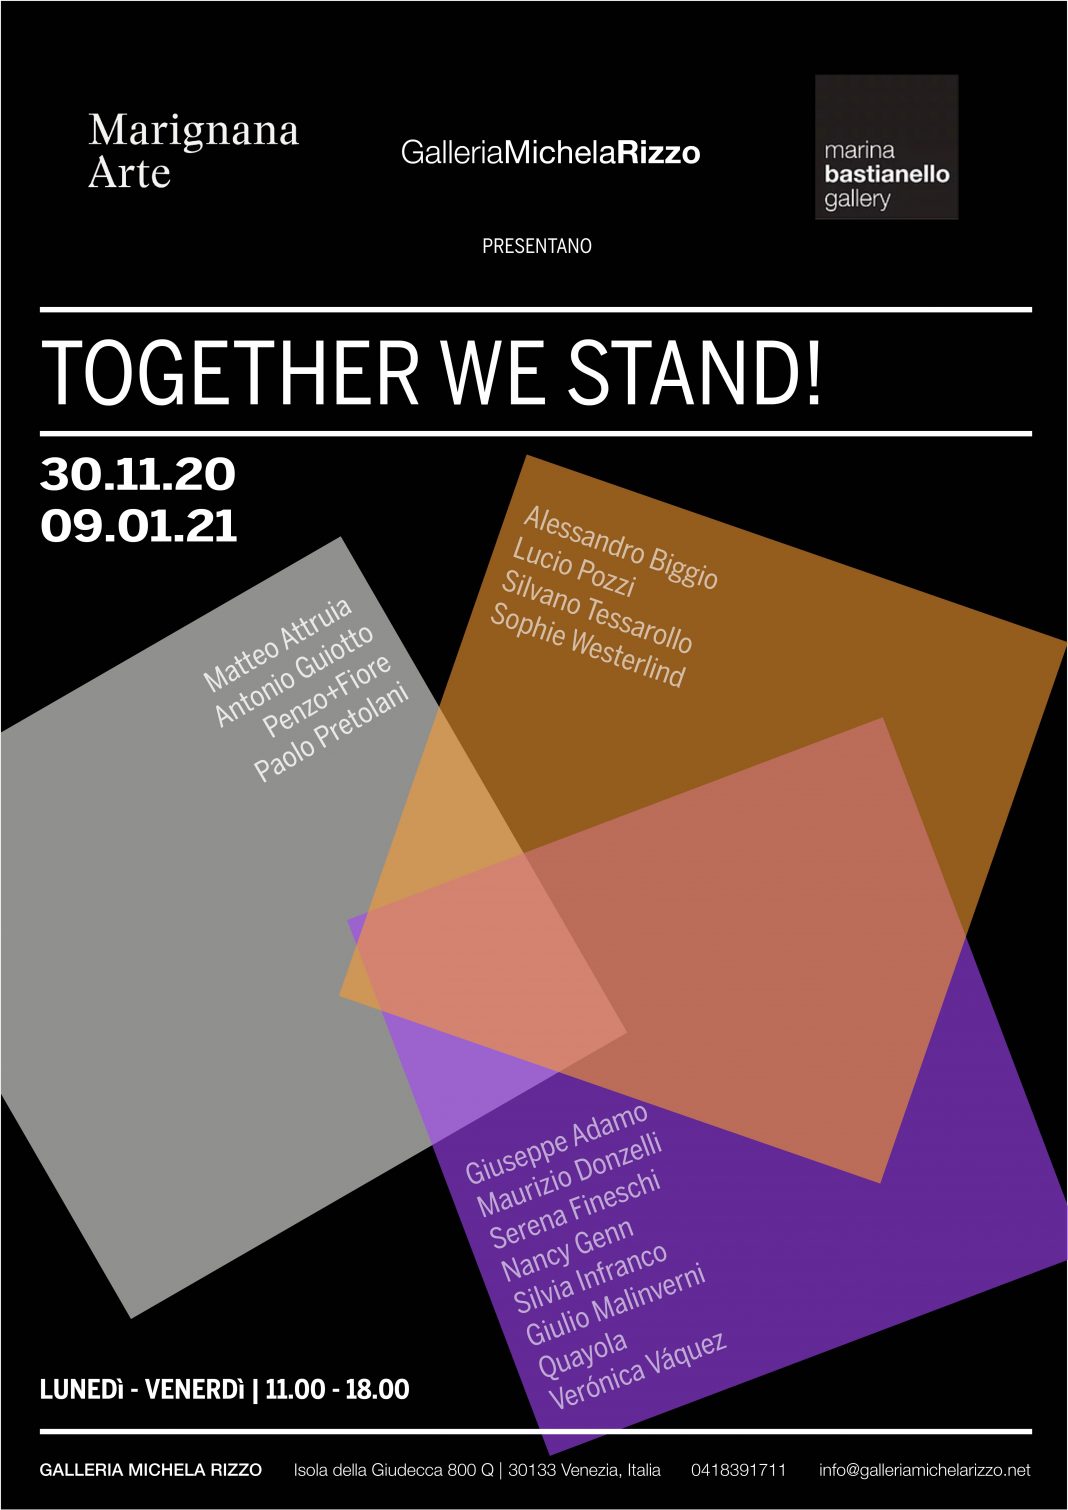 Together We Stand!https://www.exibart.com/repository/media/formidable/11/Together-we-stand-1-1068x1510.jpg